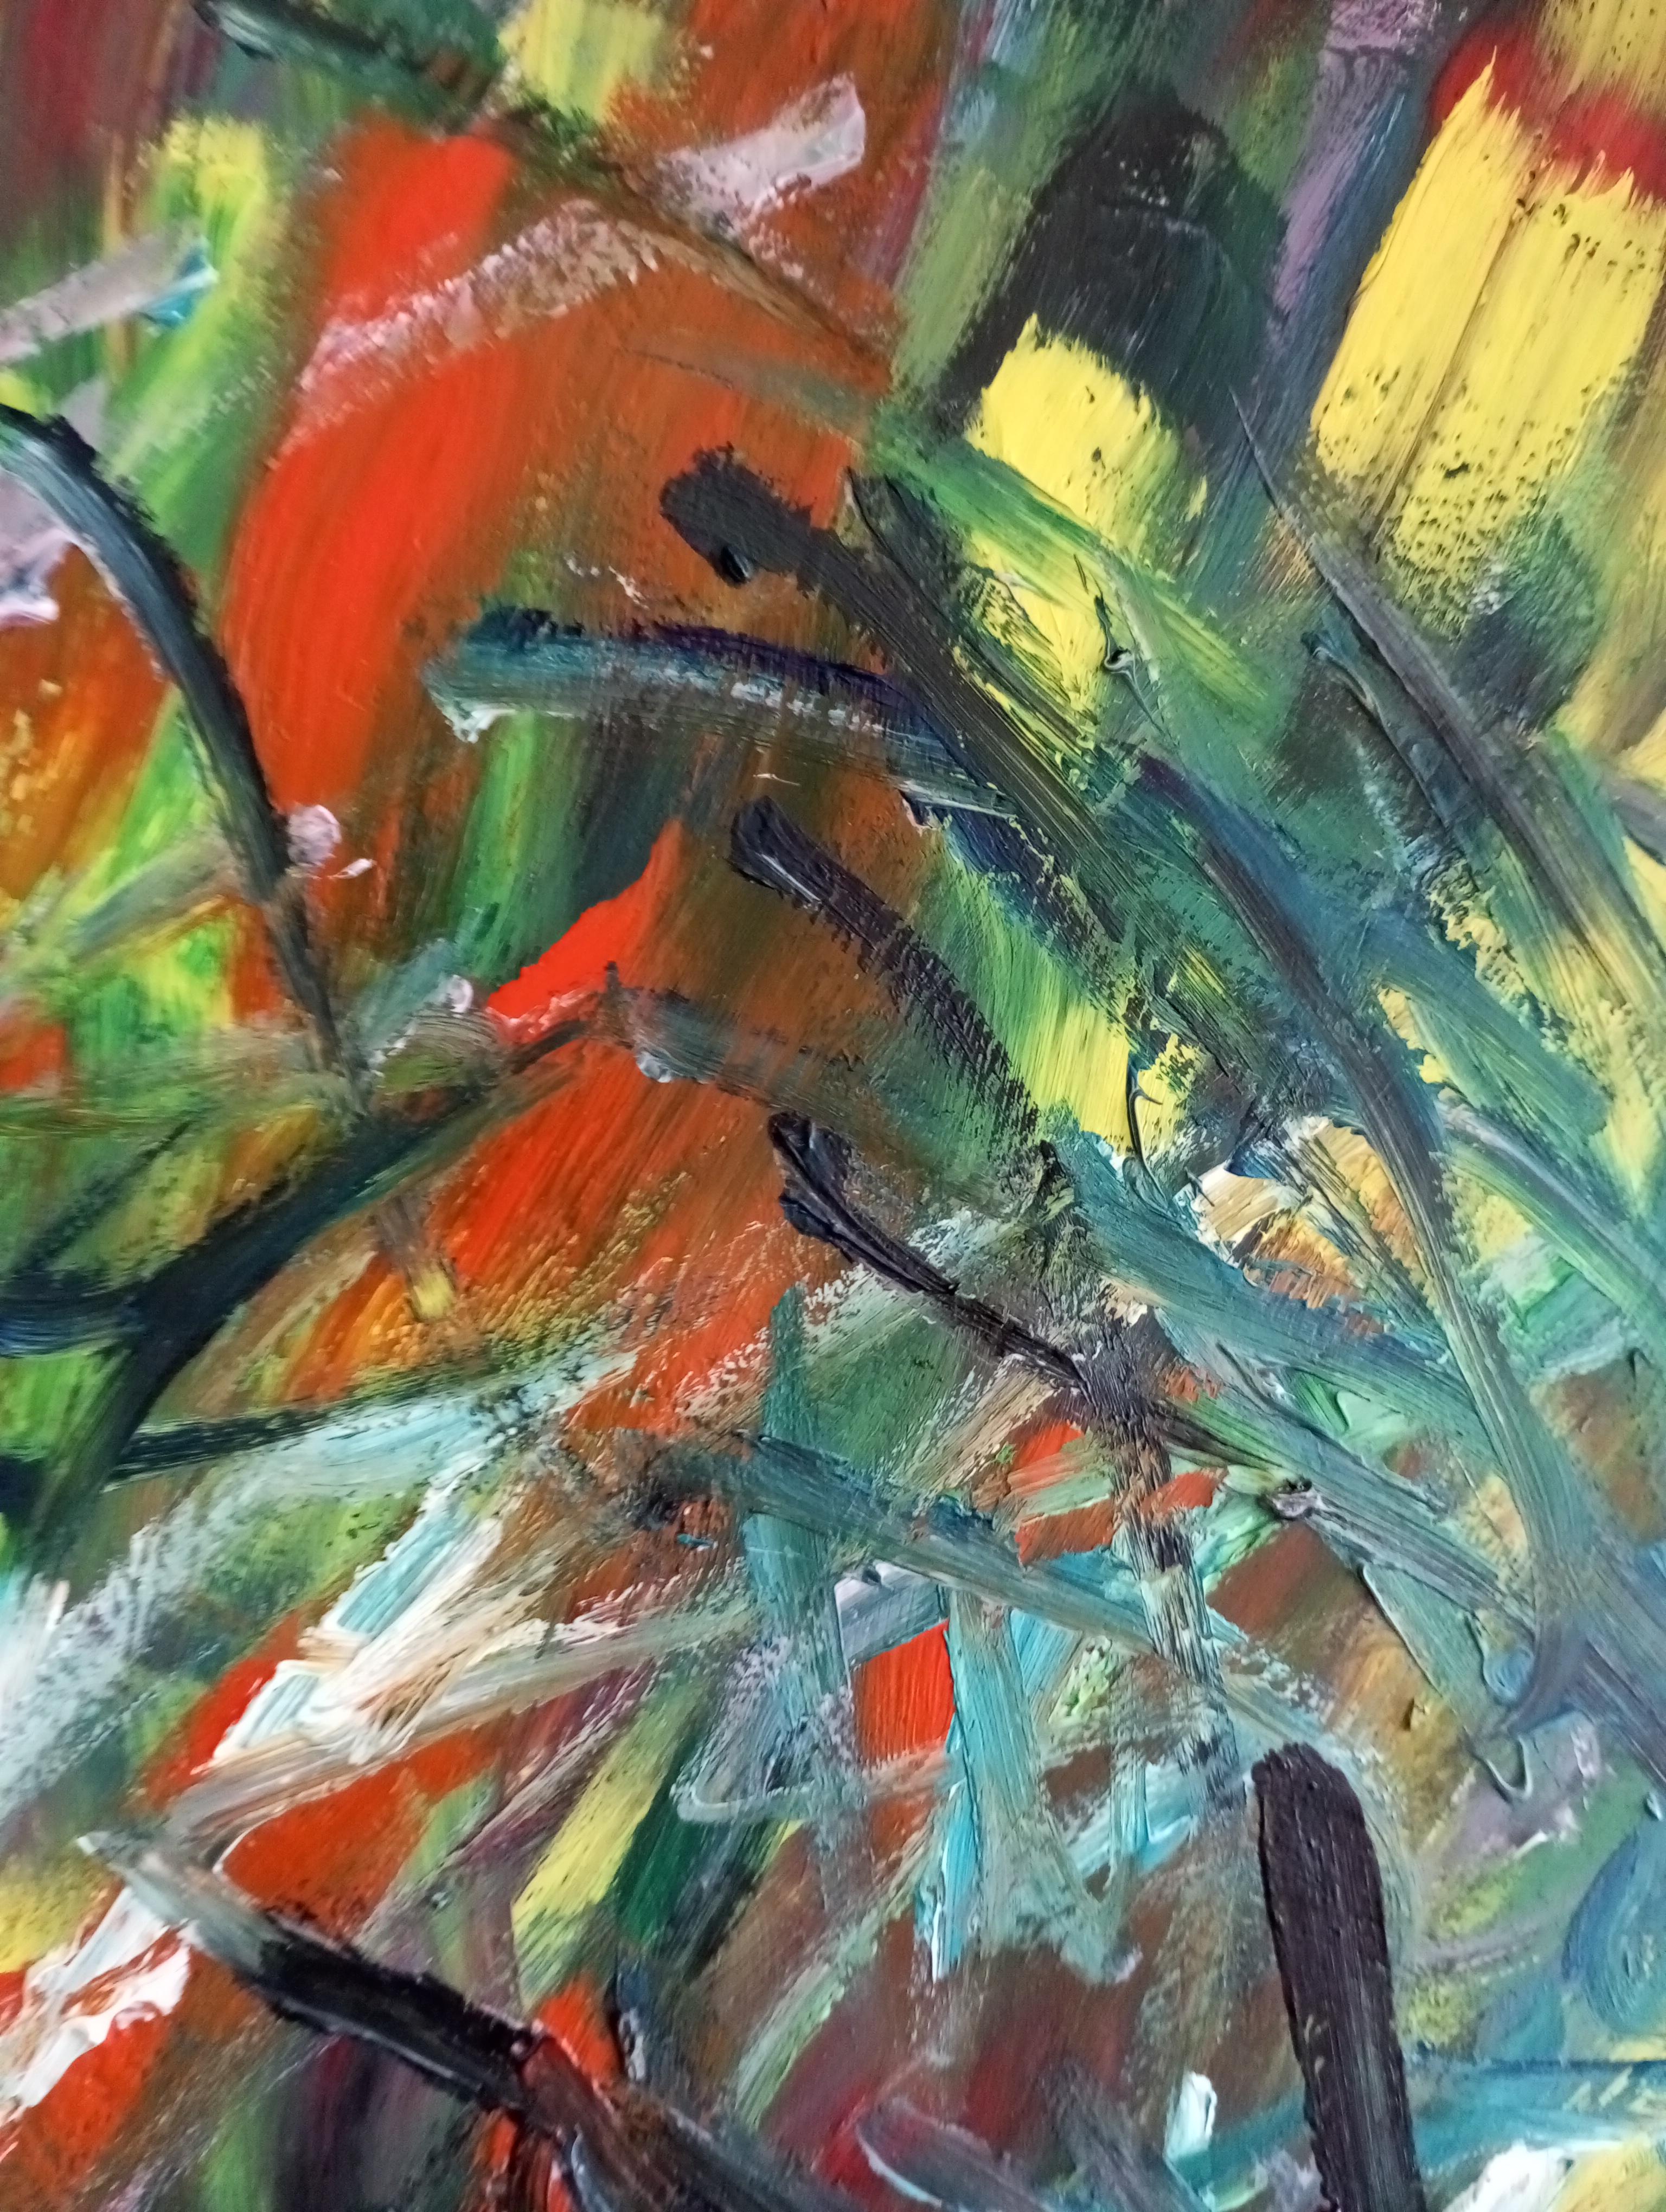 I enjoy working on impressionist artworks with an expressive touch.

This artwork was done with oil paints on a heavyweight professional paper.

In my artworks I transform my energy by using these vibrant colors, forms, and composition to create